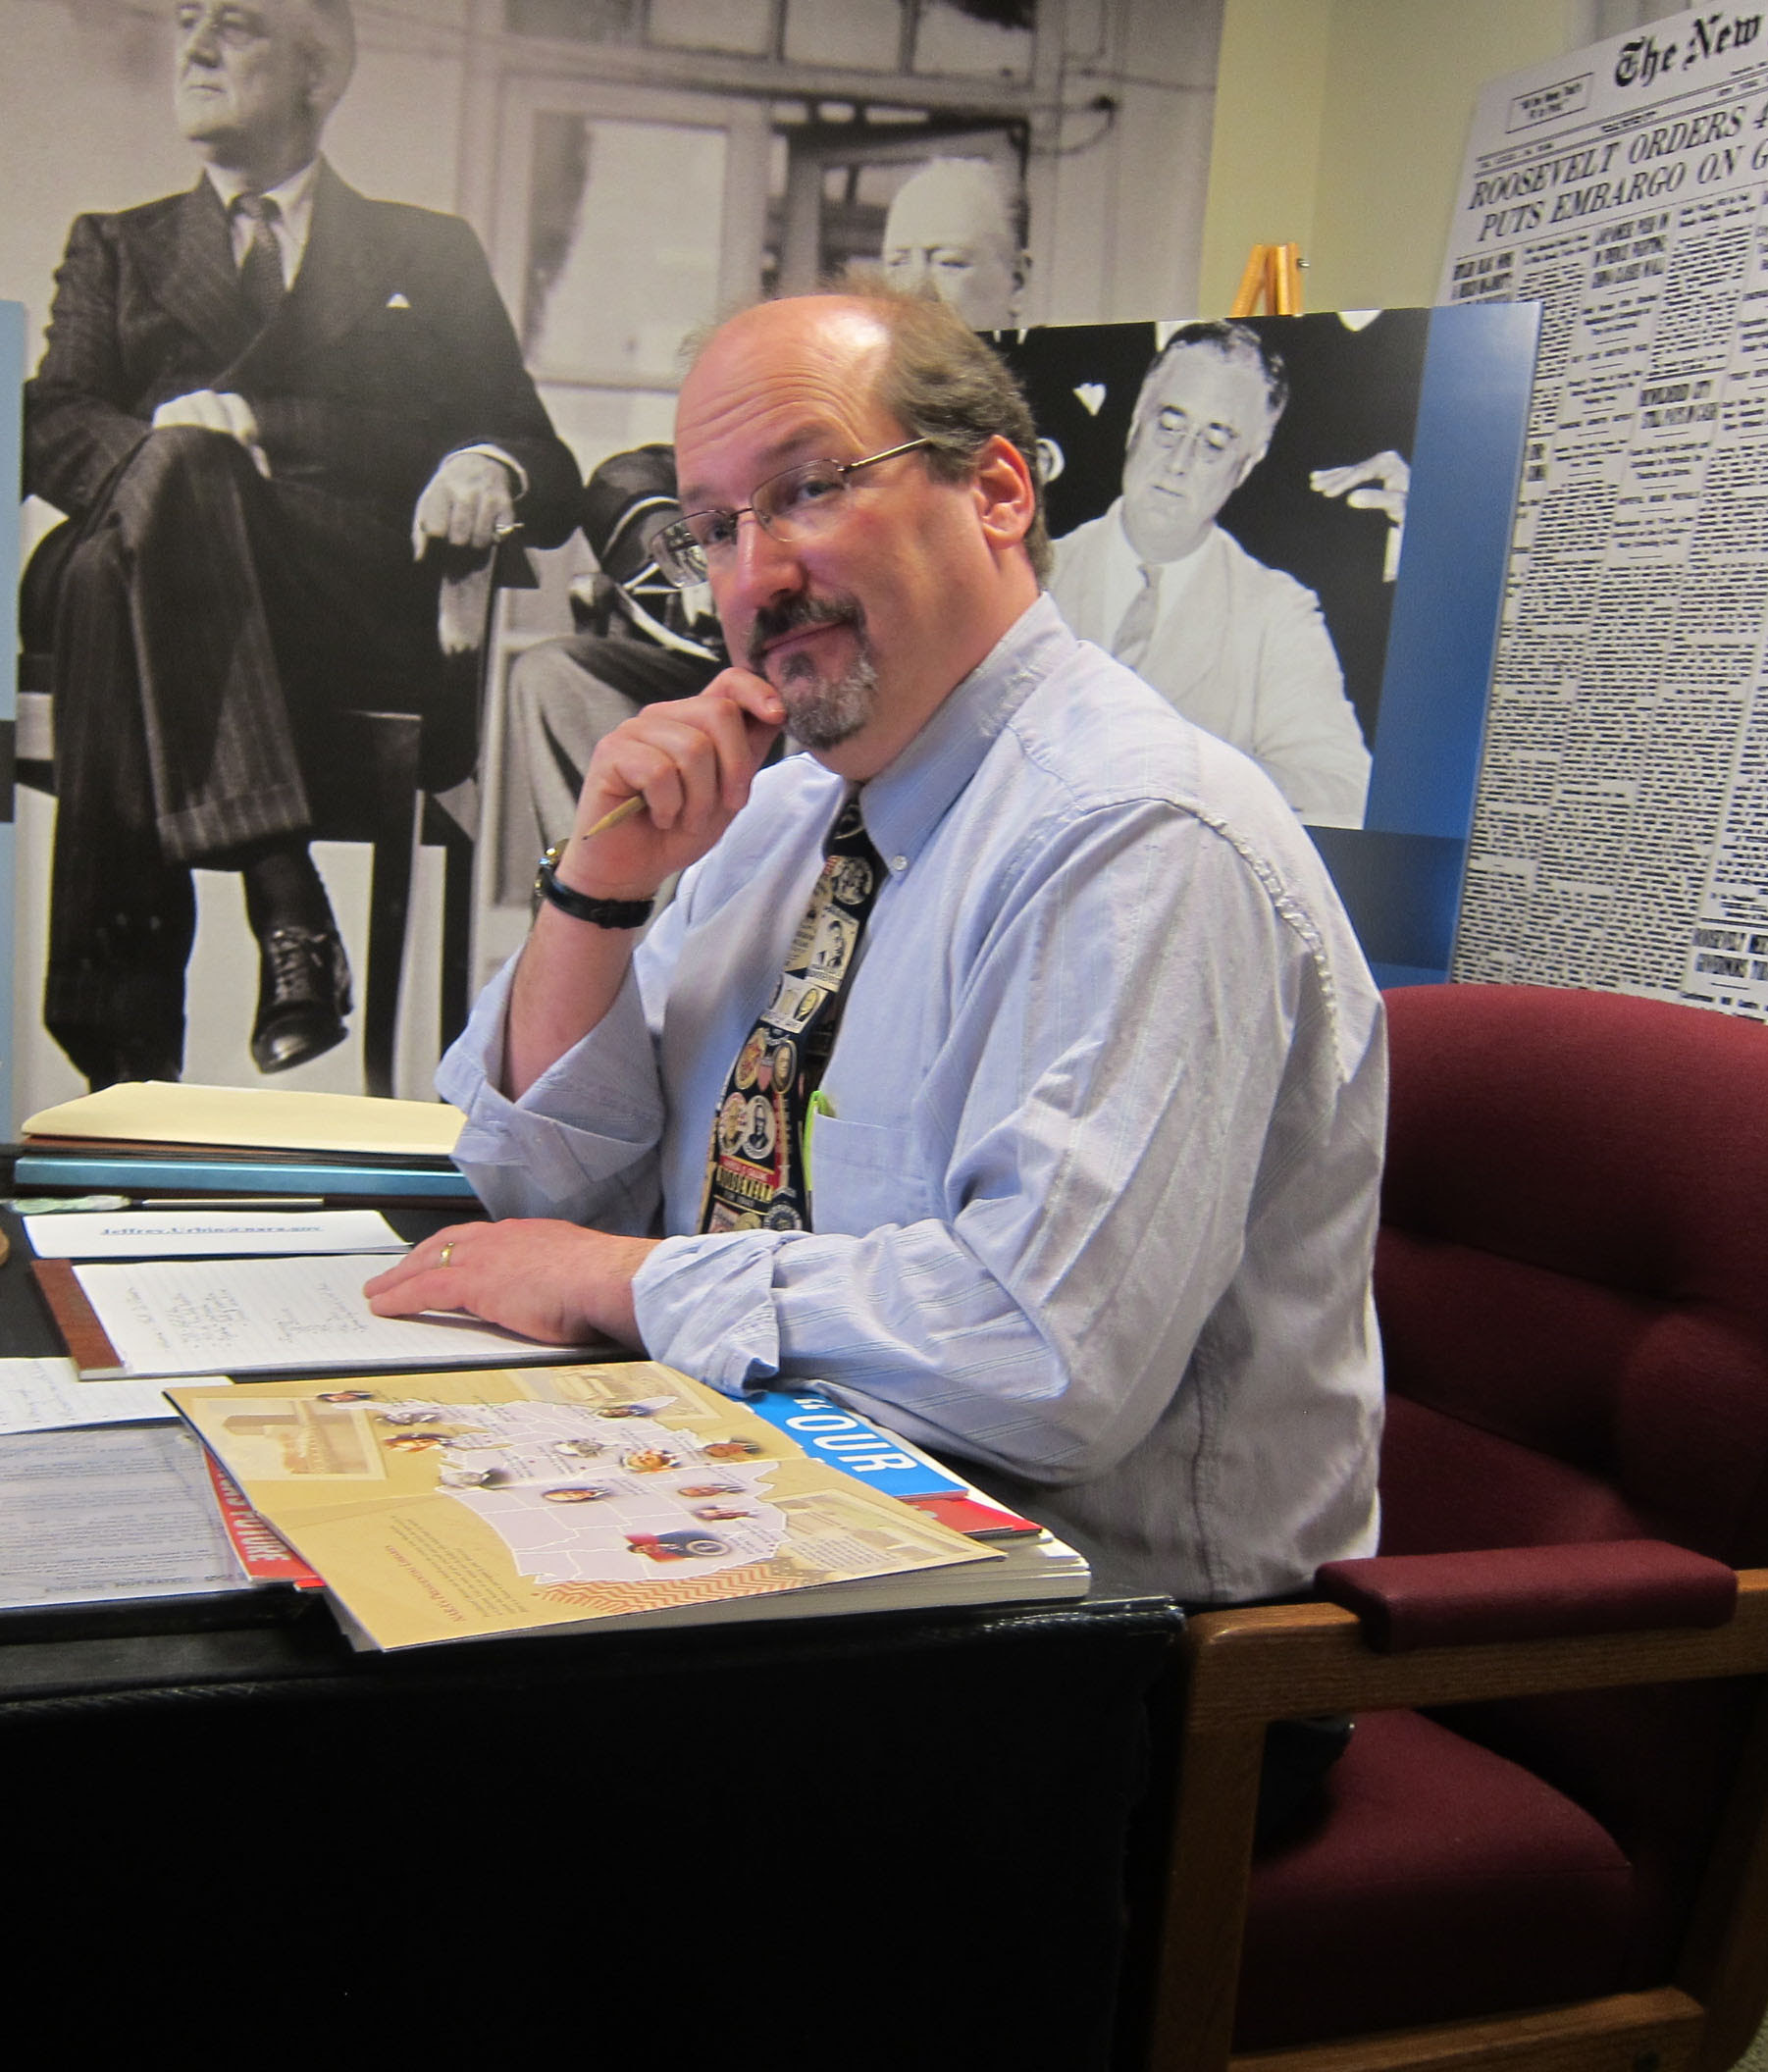 Photo of Jeff Urbin sitting at his desk in a shirt and tie with FDR memorabilia in background